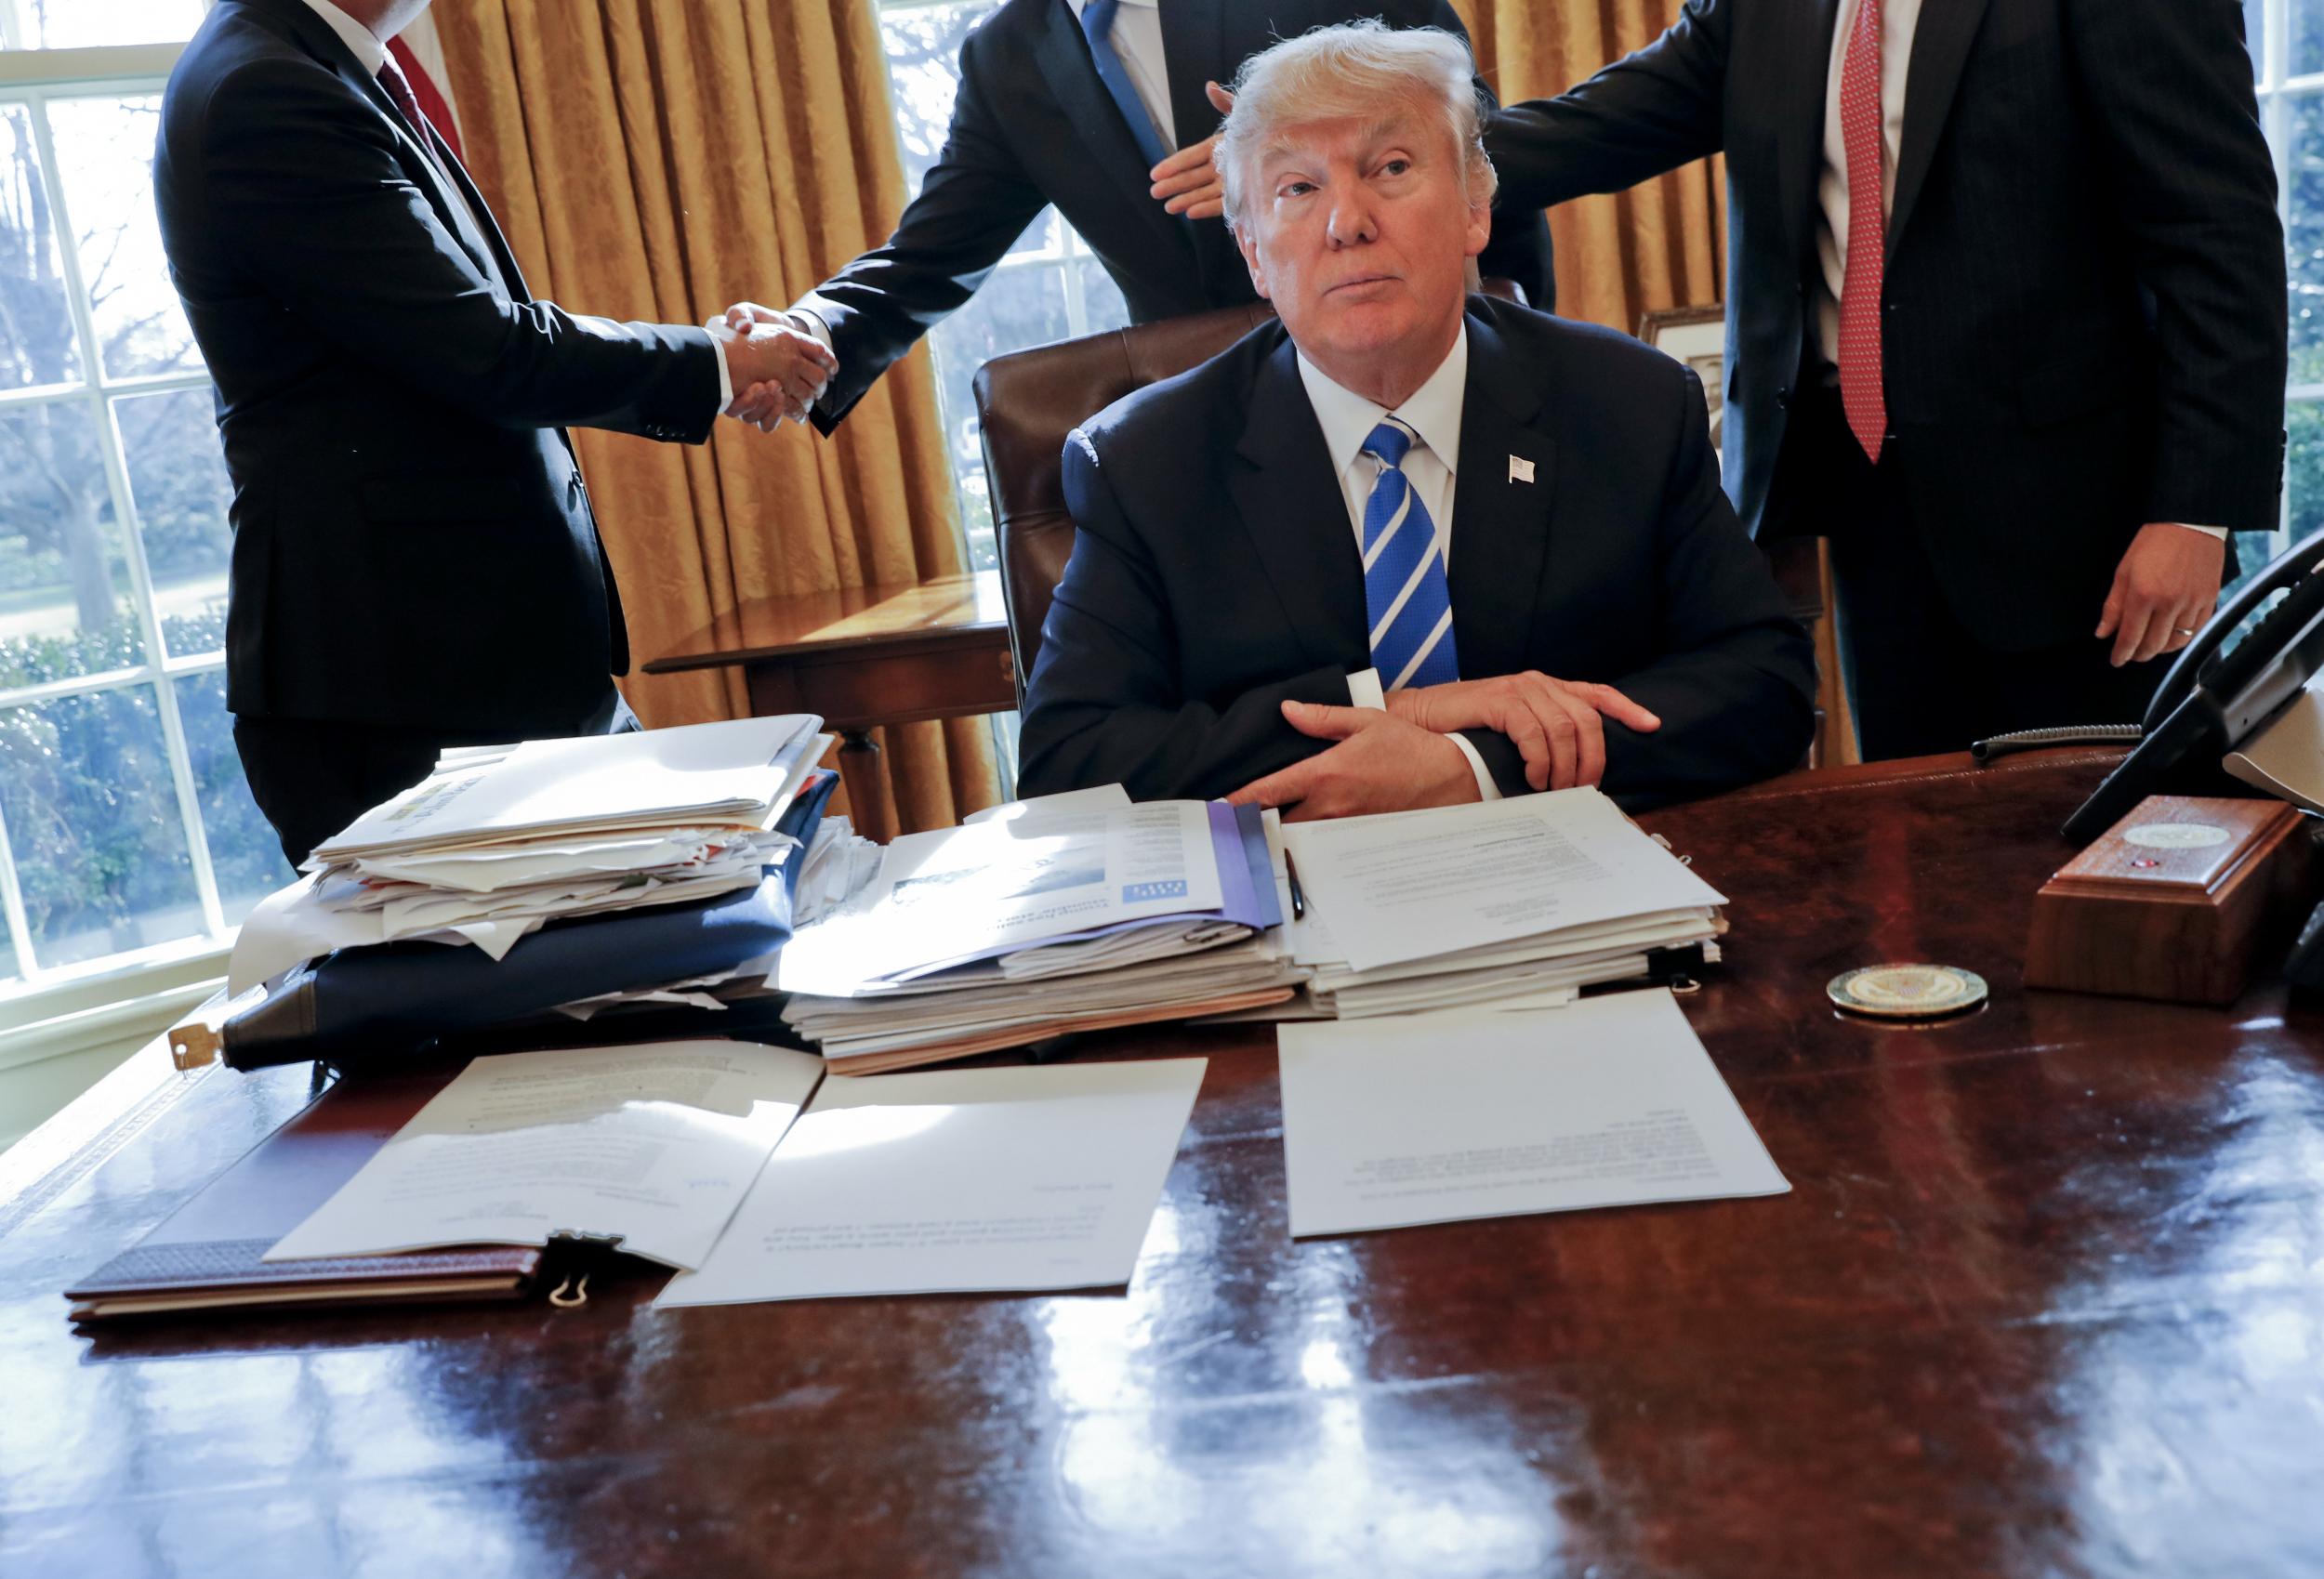 Cutting a lonely figure: the President at his desk in the Oval Office